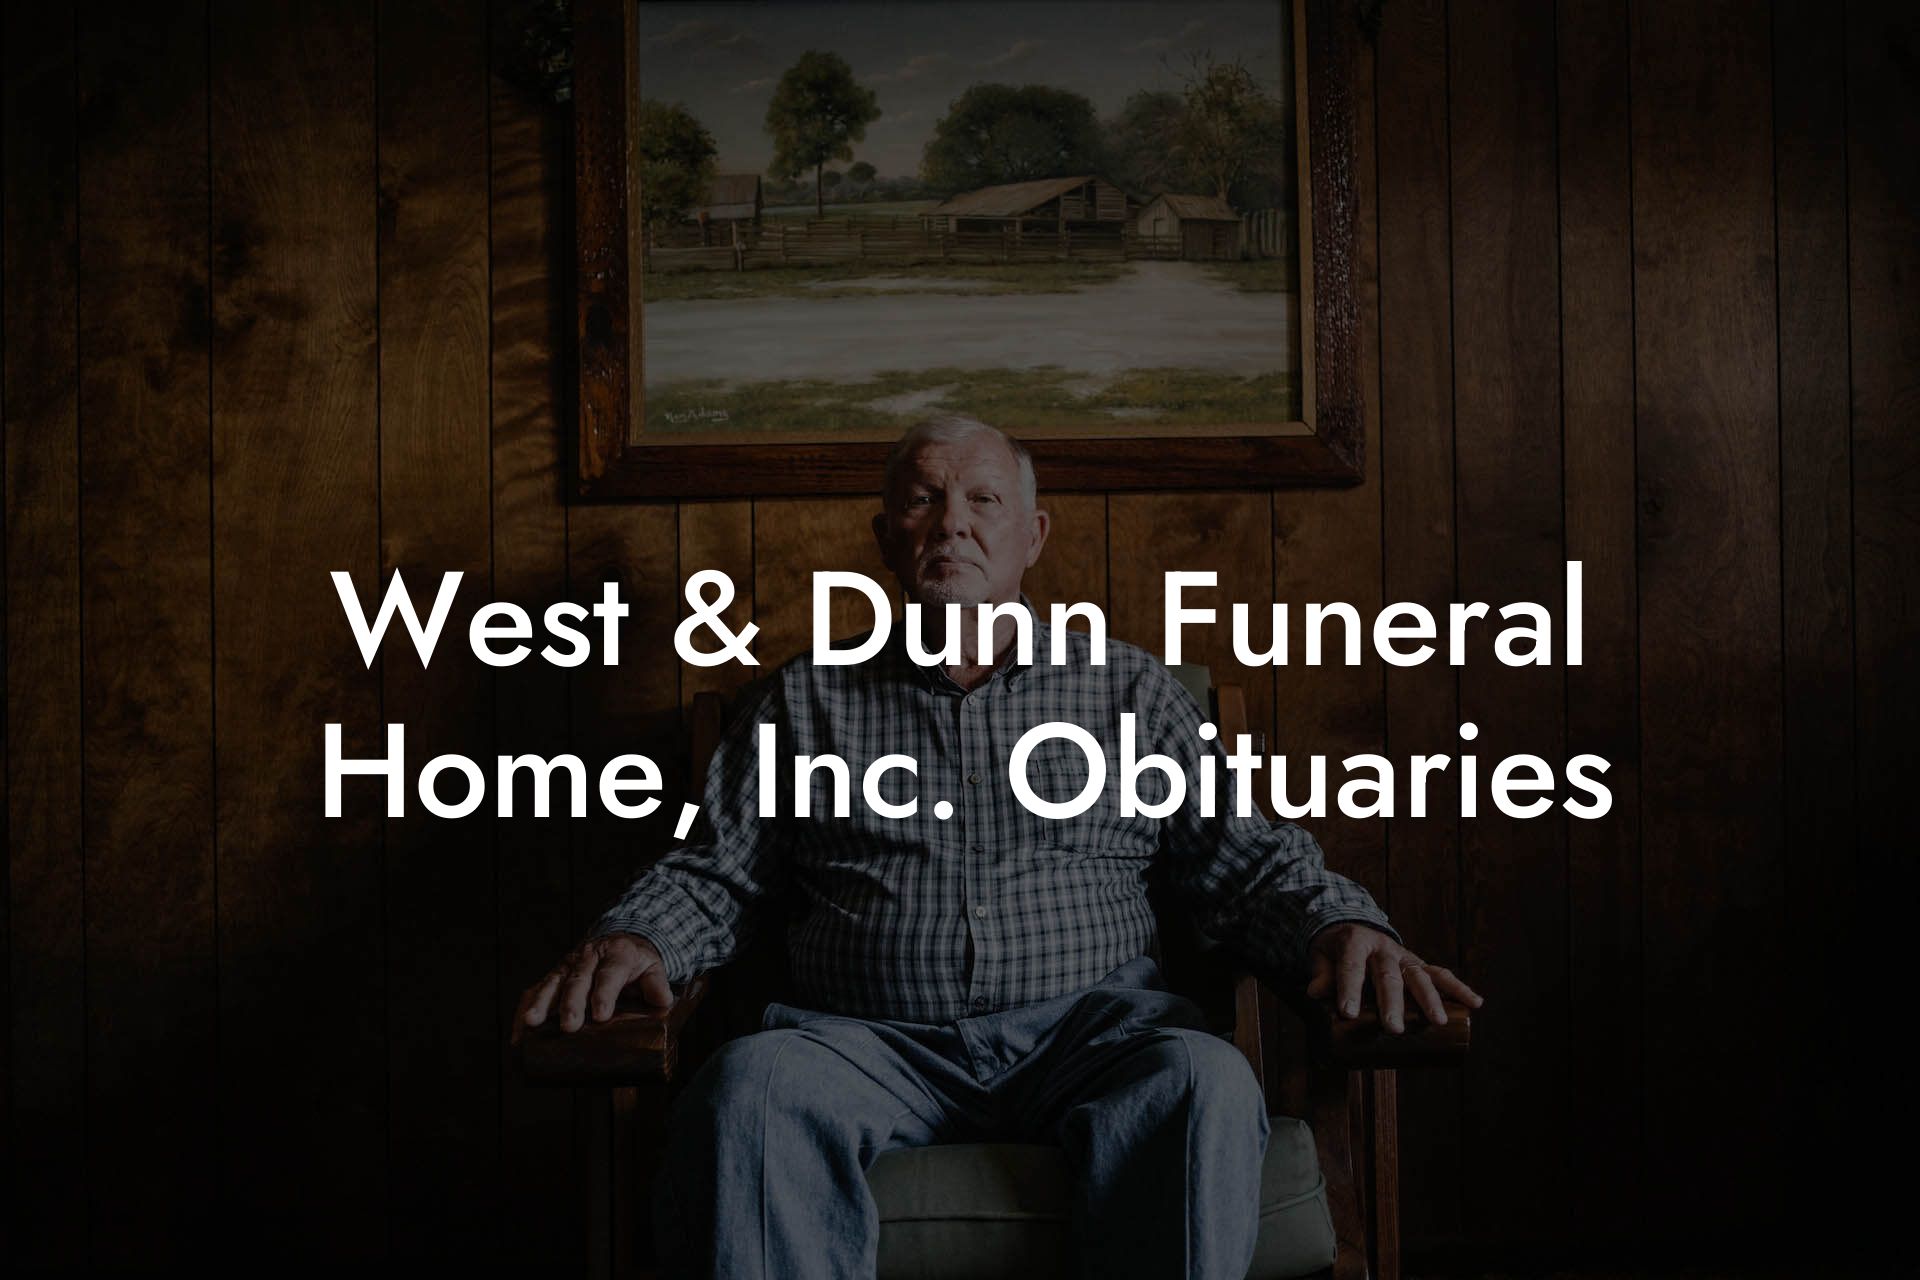 West & Dunn Funeral Home, Inc. Obituaries